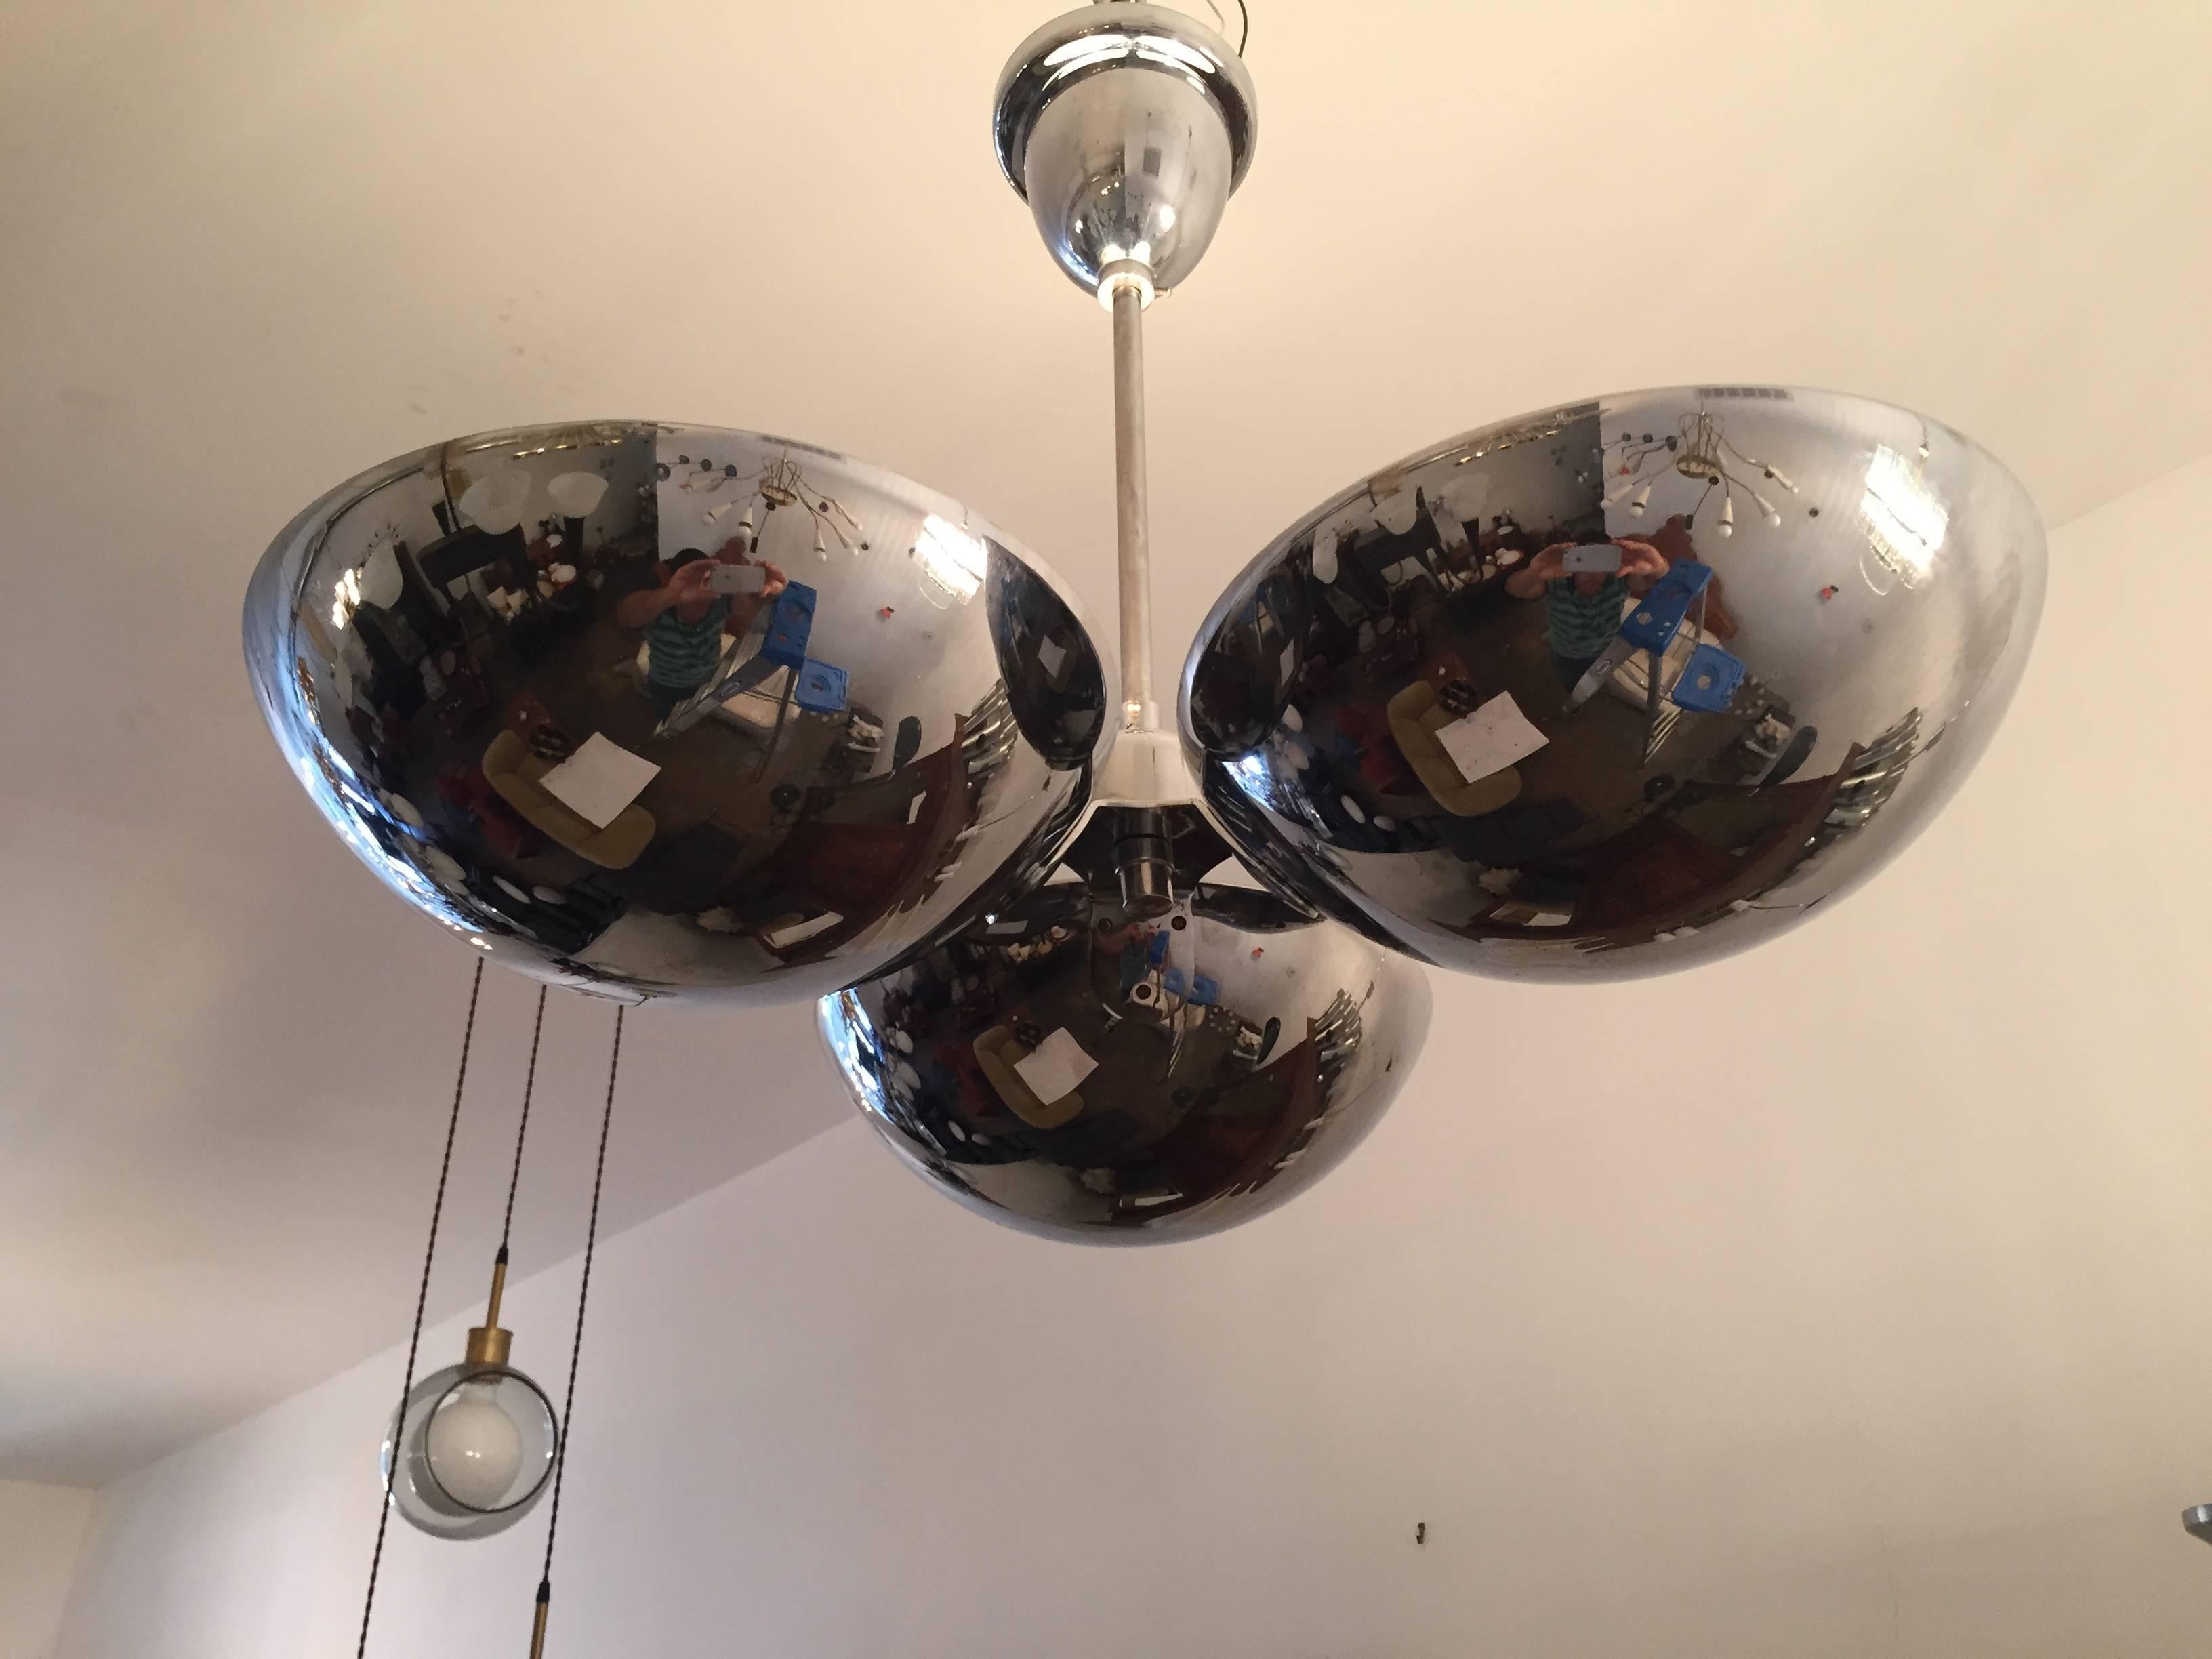 A great 1930s Bauhaus polished chrome flush ceiling light or hanging pendant. The fixture is composed of three half domes each with a porcelain 120w light socket. All rewired. Ceiling pole can be shortened or lengthened.